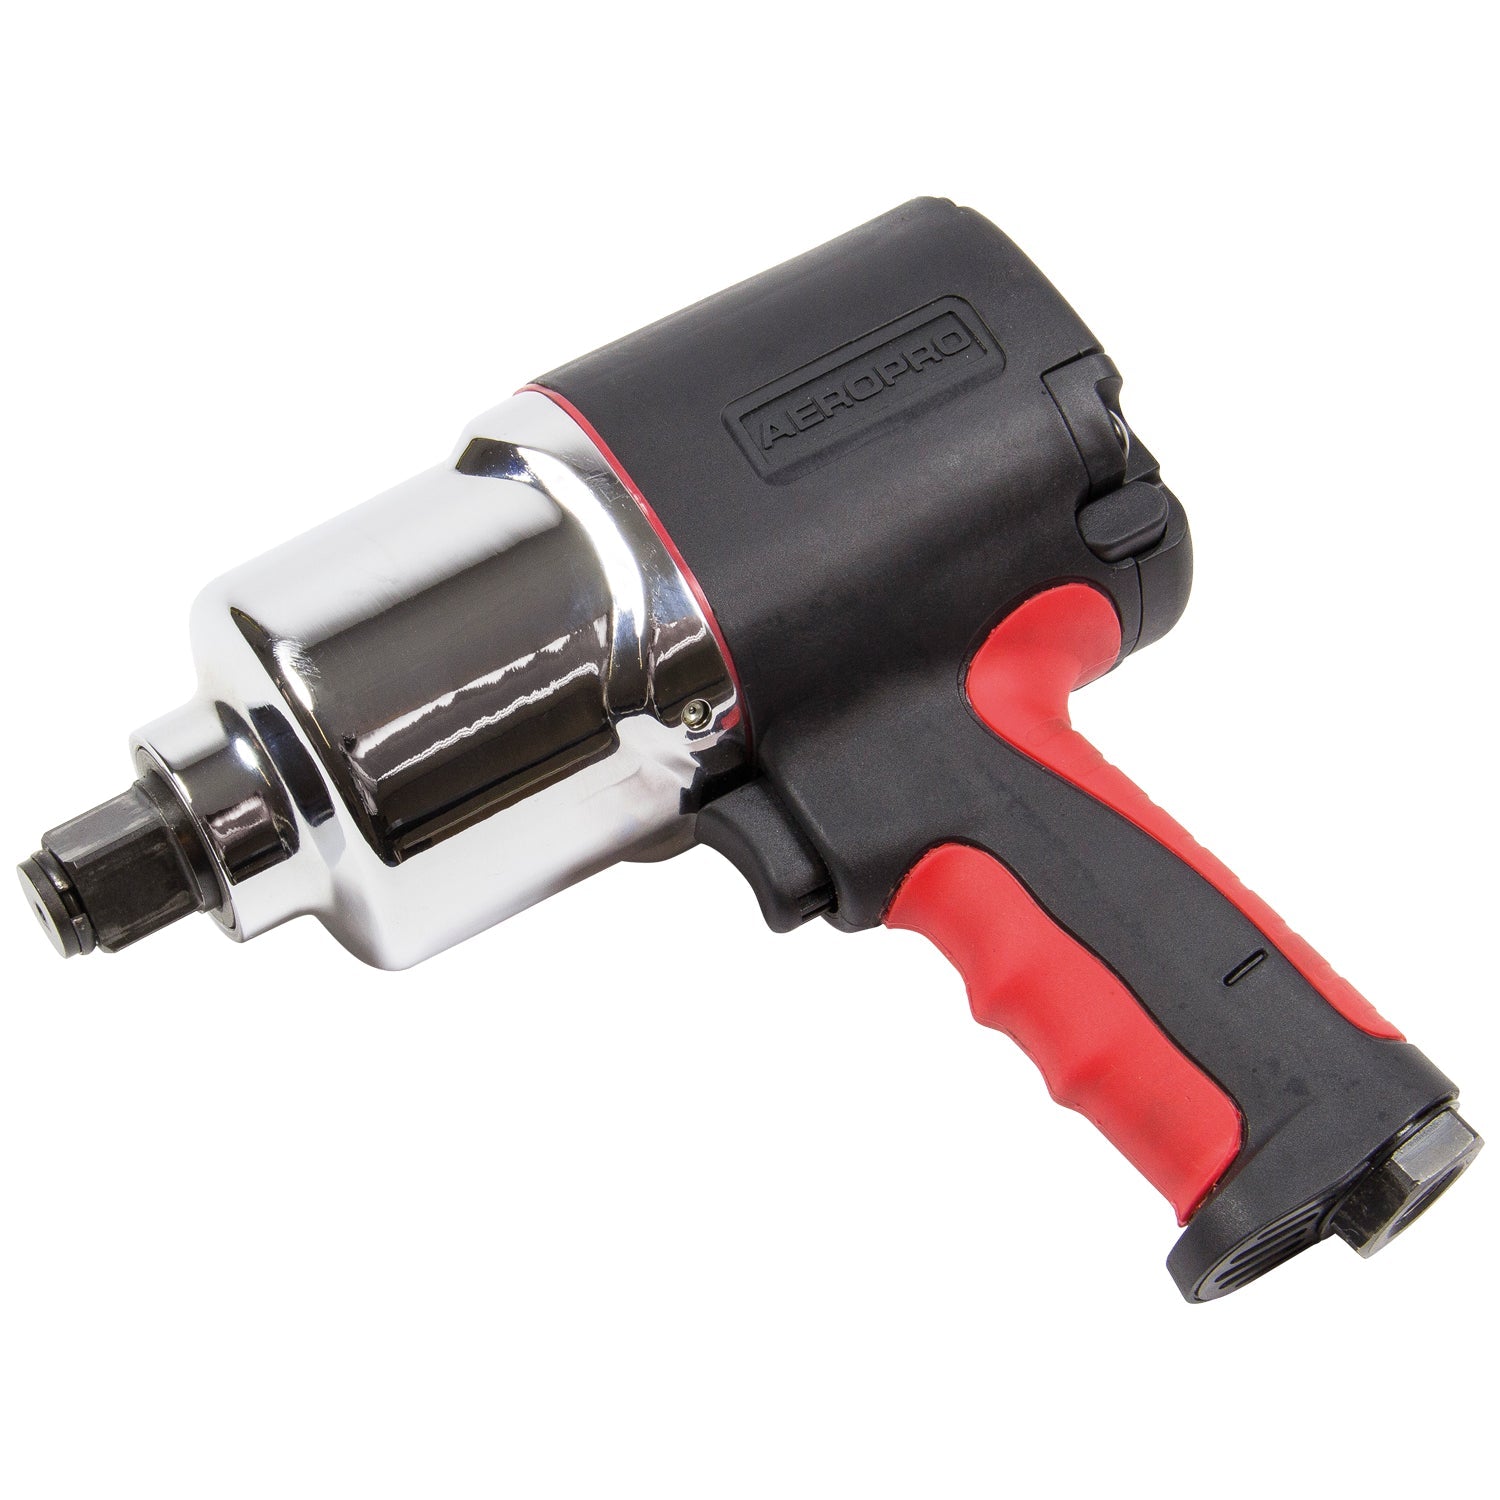 SIP 3/4" Advanced Composite Air Impact Wrench, Sip Industrial